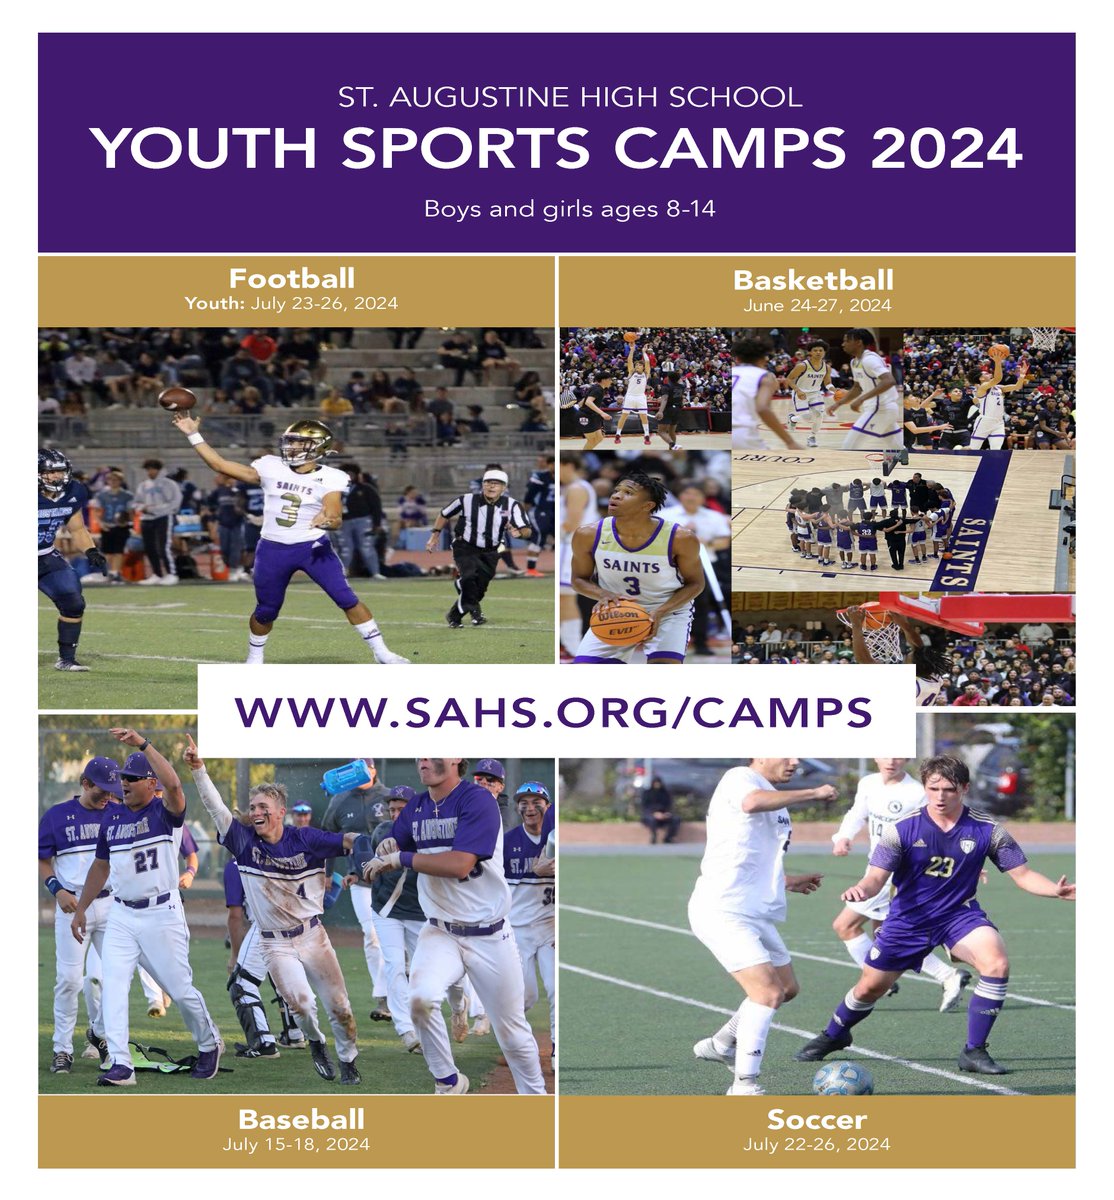 Saints Sports Camps are fast approaching. Camps are for boys and girls ages 8-14. Join the fun at sahs.org/camps. GO SAINTS!